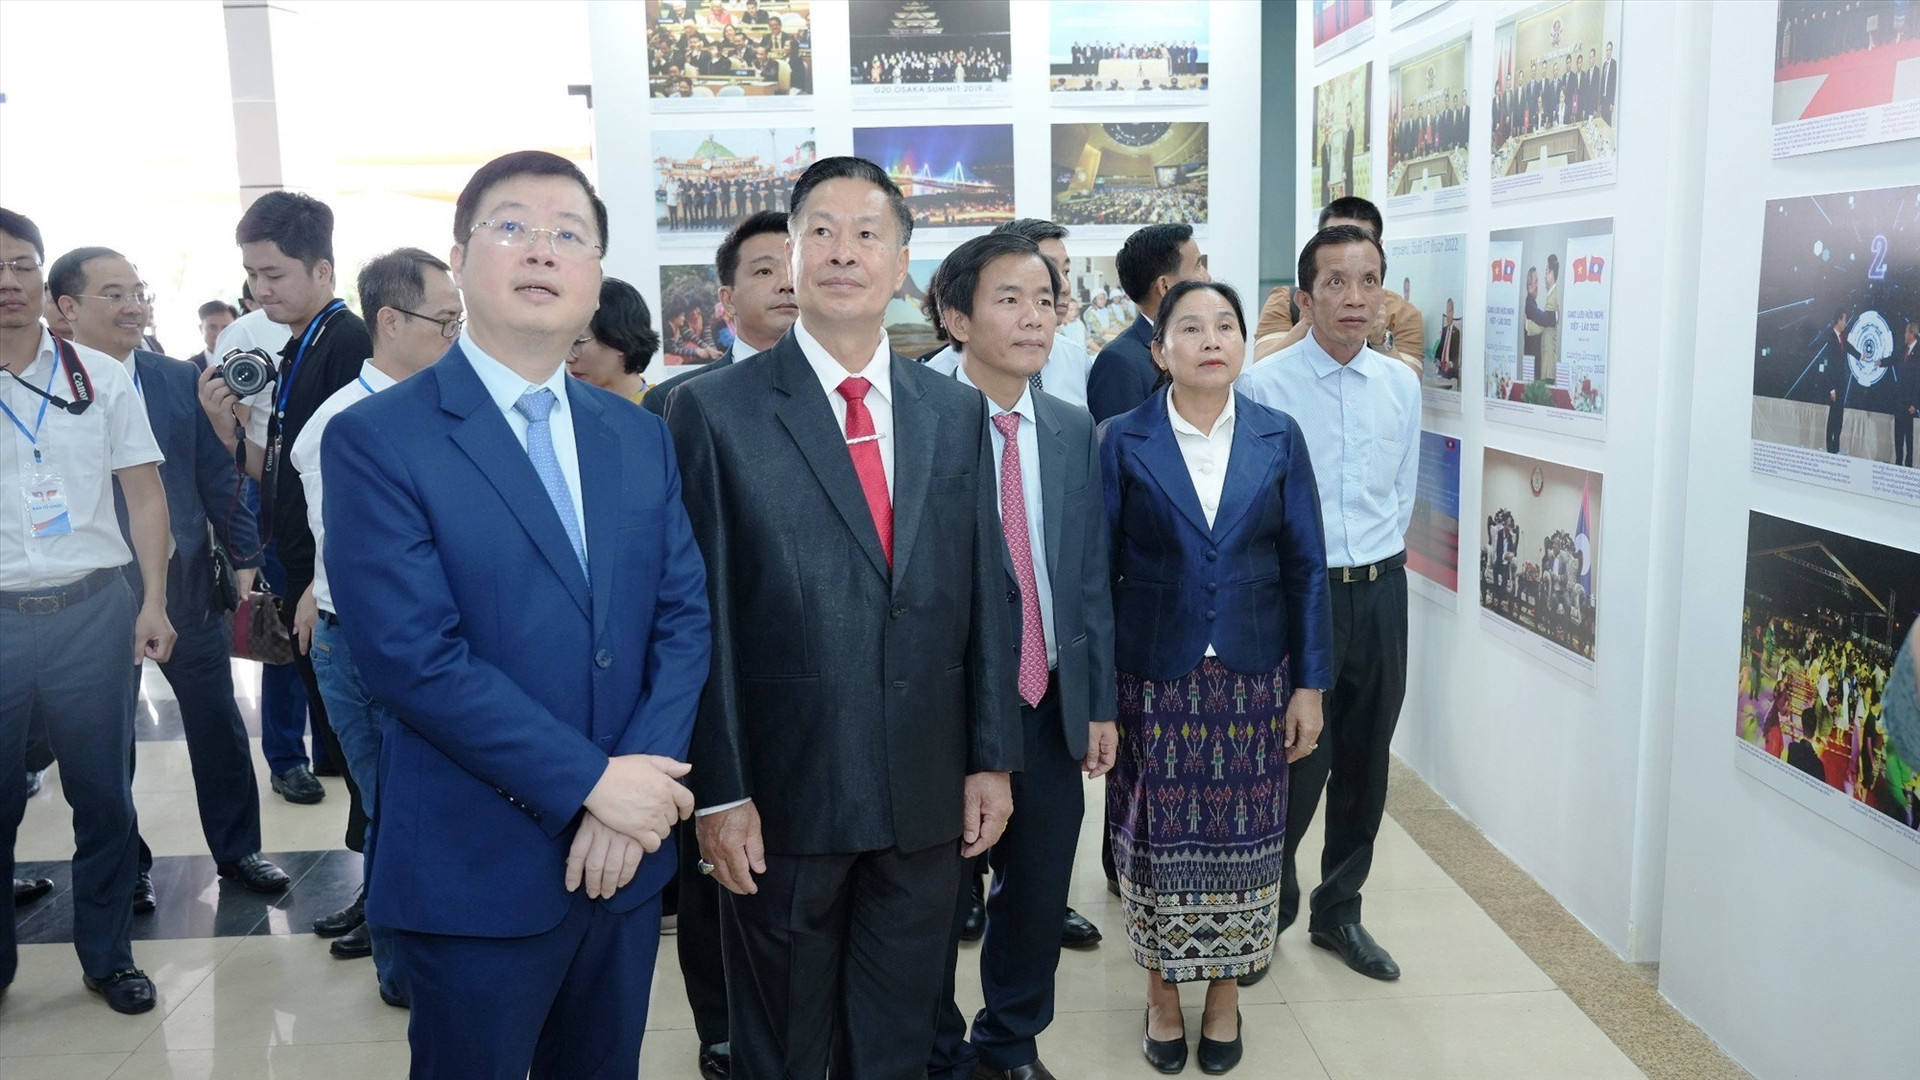 Vietnamese and Lao delegates at the exhibition